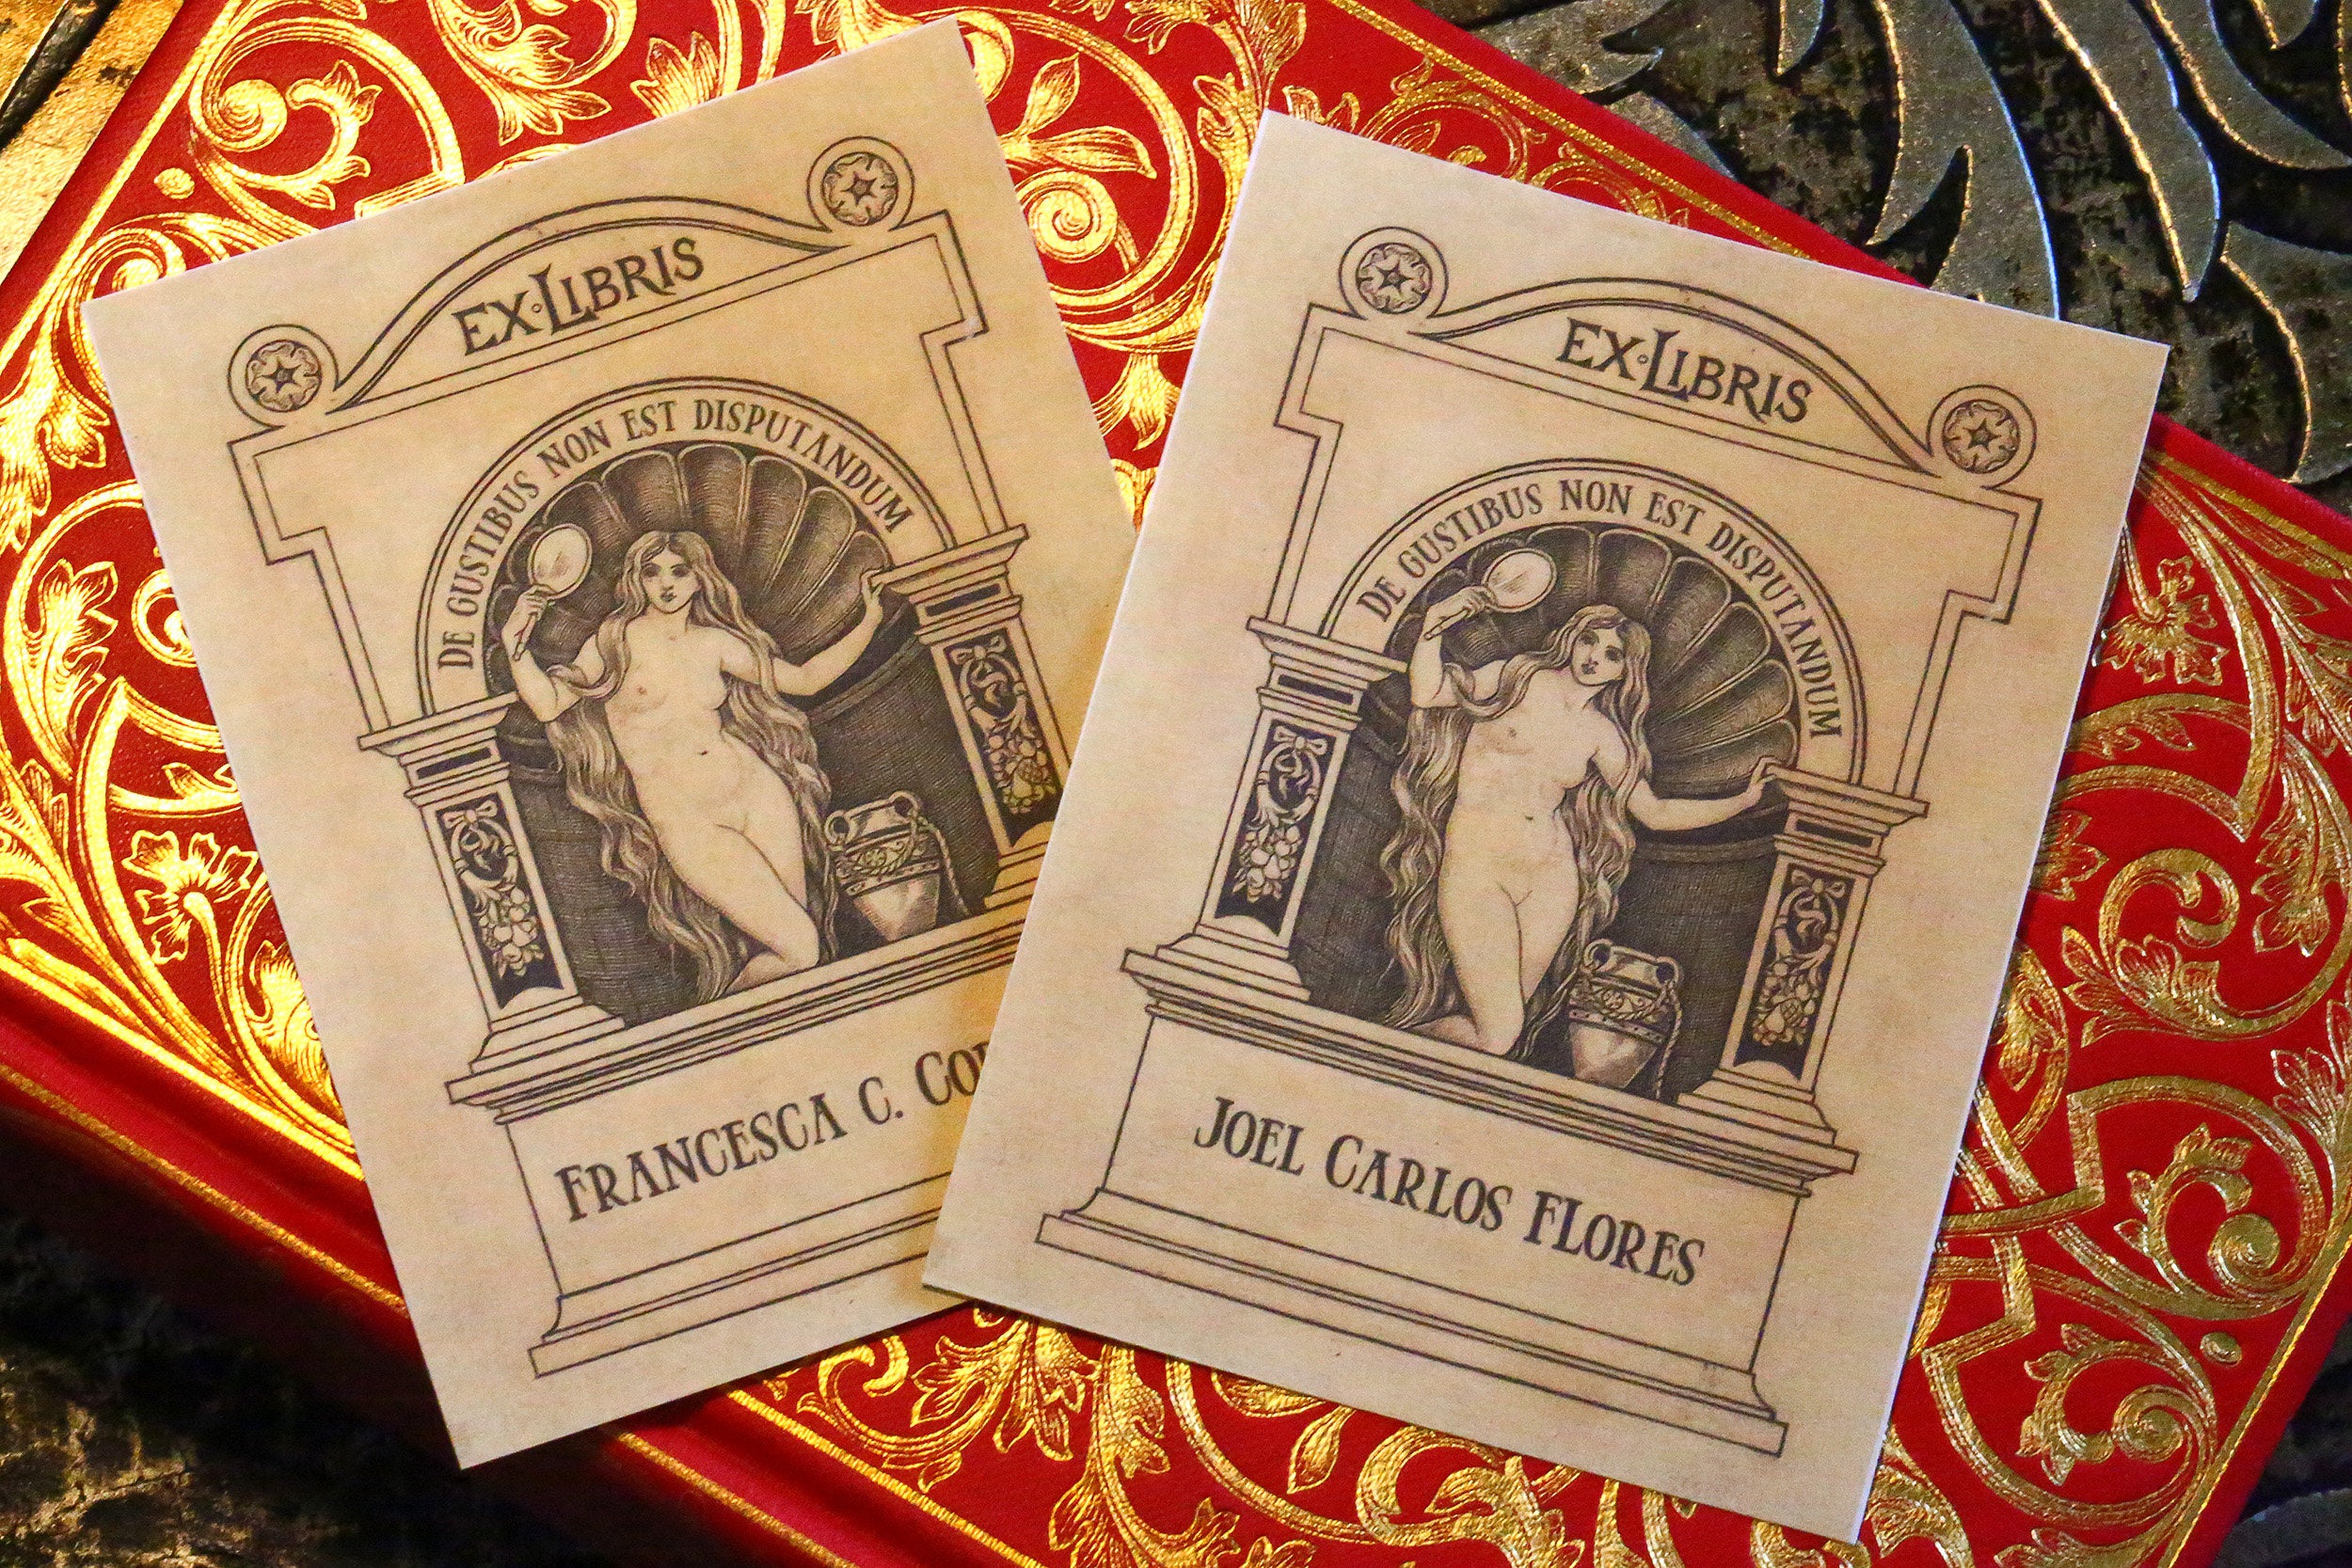 Nude Venus, Personalized Erotic Ex-Libris Bookplates, Crafted on Traditional Gummed Paper, 3in x 4in, Set of 30